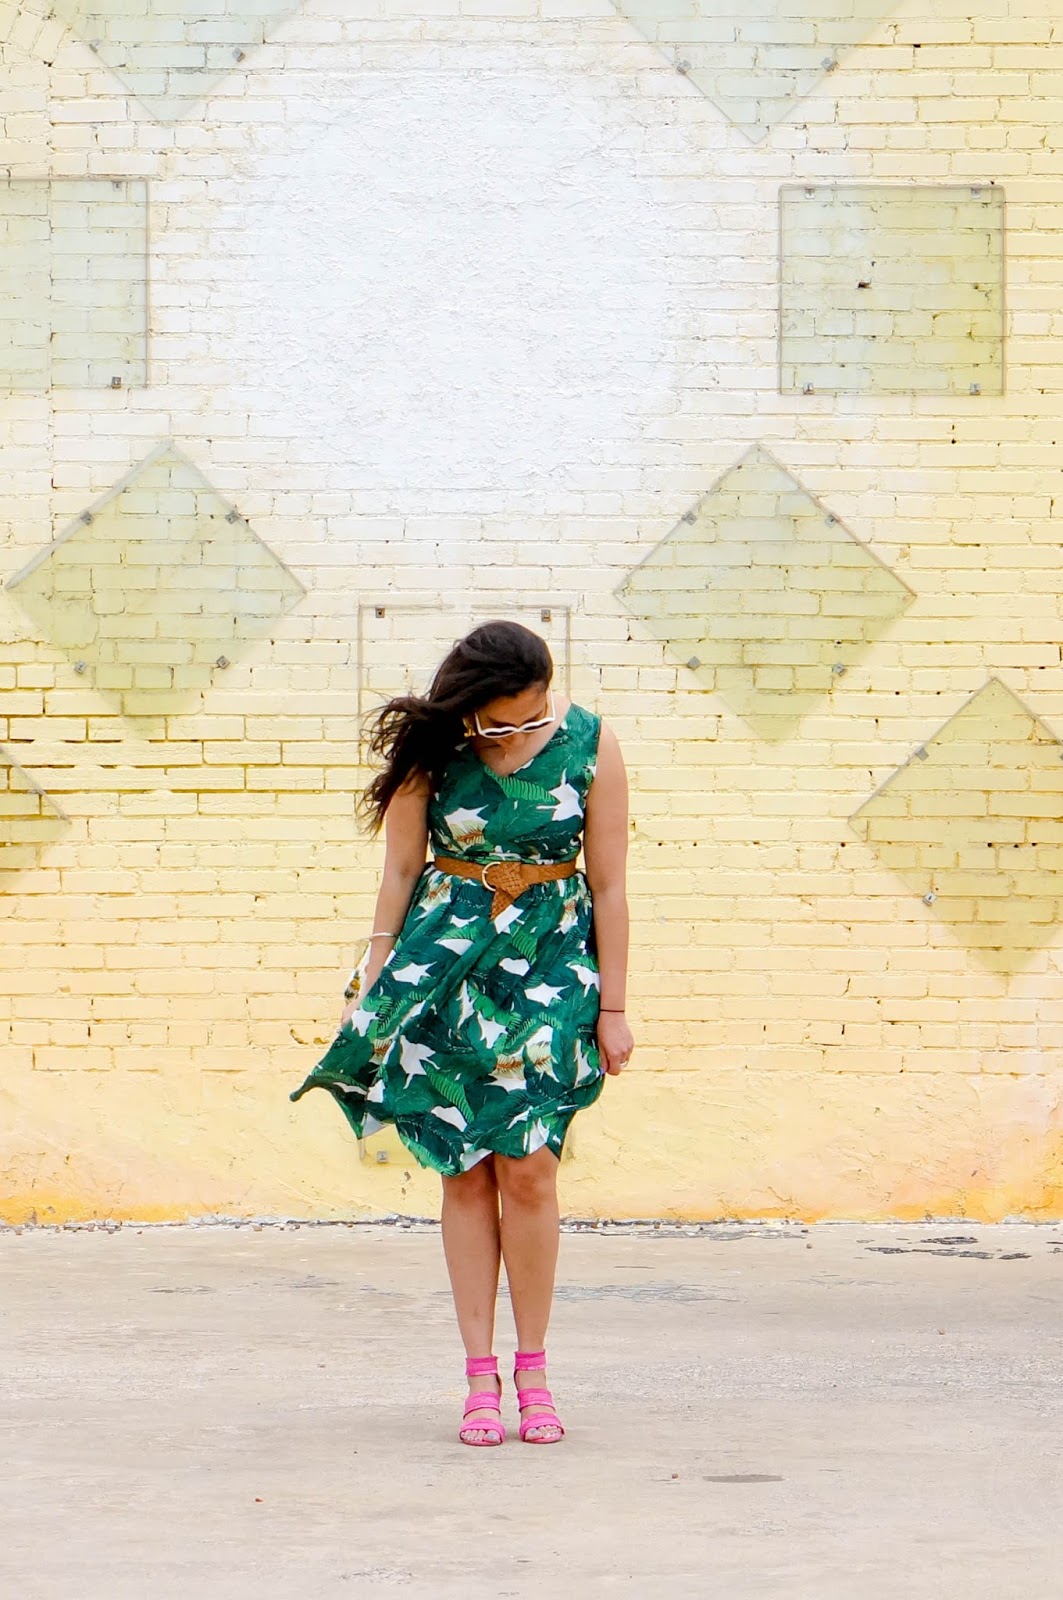 Amelia B. in the Big D.: I can't be-leaf this dress!